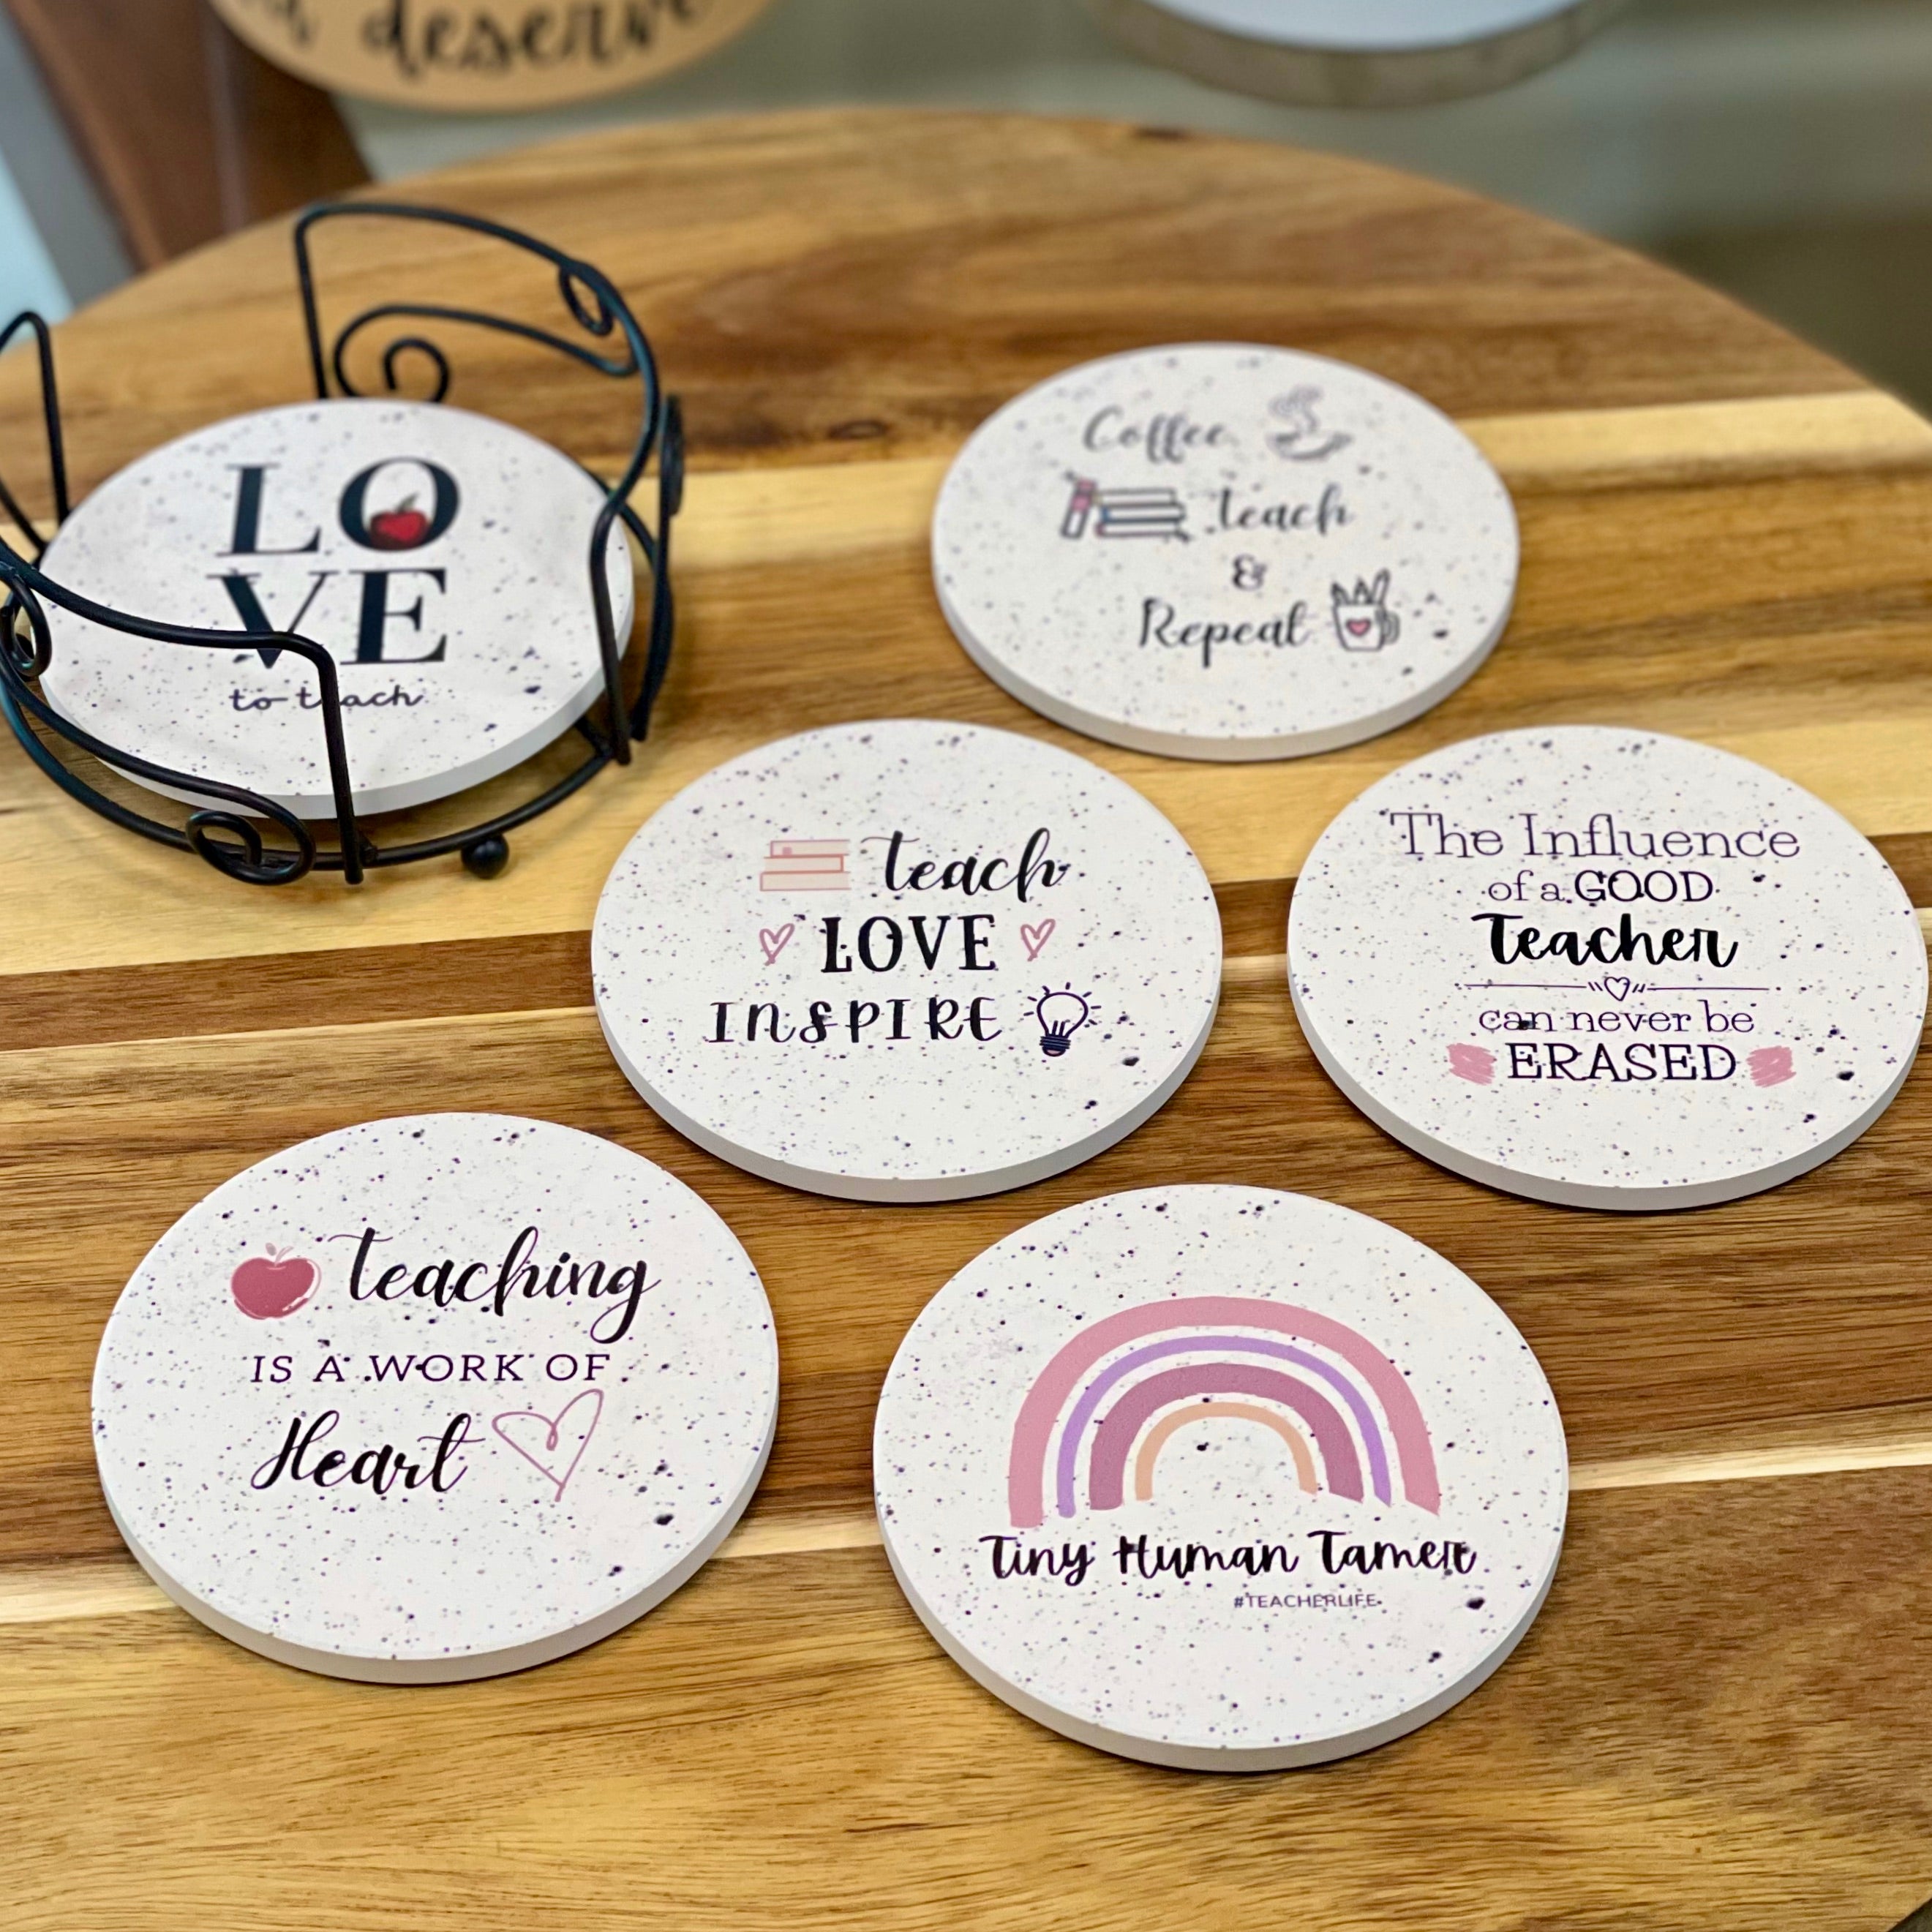 Best Teacher Gifts for Women - Teacher Appreciation Gifts - Absorbent Ceramic Coasters 6pc - Metal Holder & Cylinder Kraft Gift Box Included (Sincere) - KCT Store